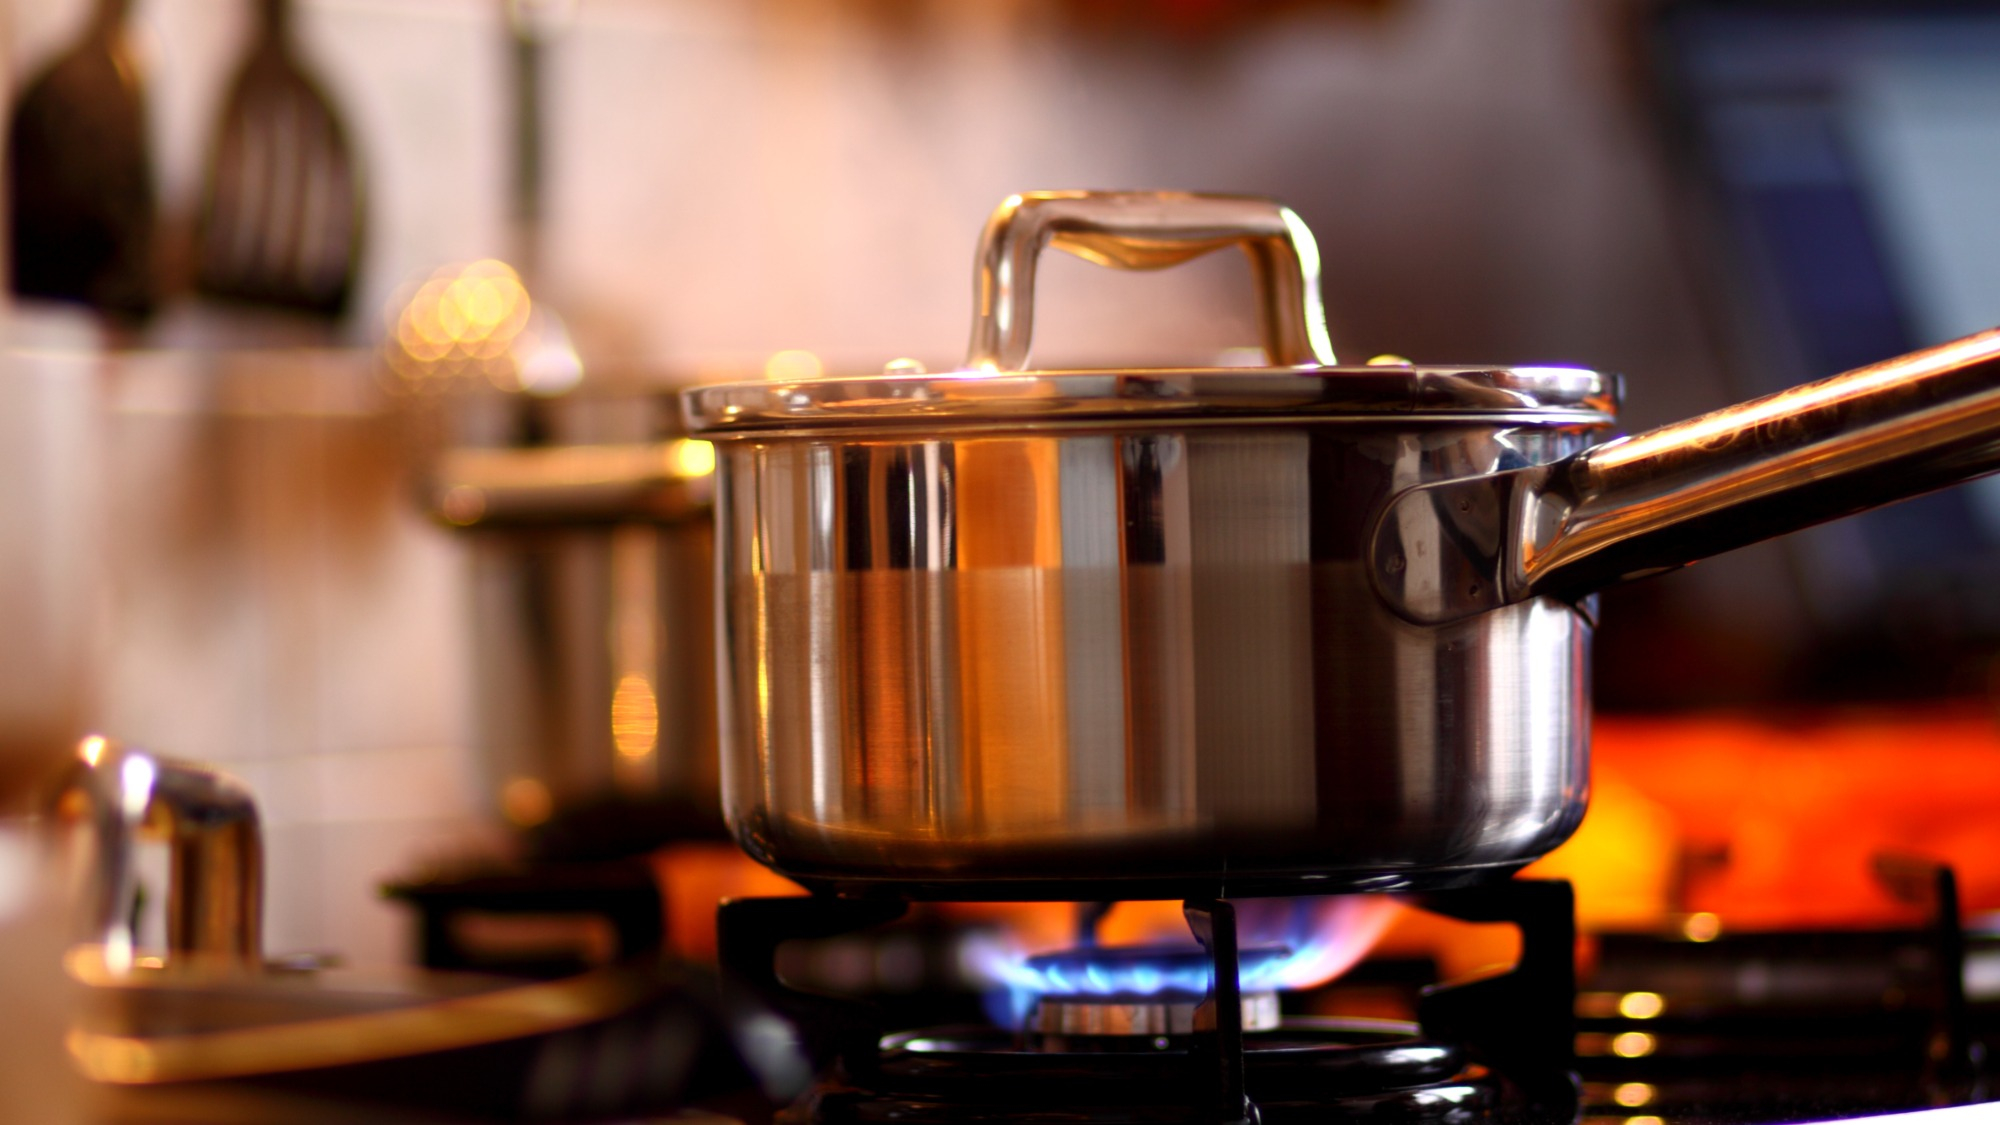 Opinion: Gas stoves are bad for your health. The industry hid it